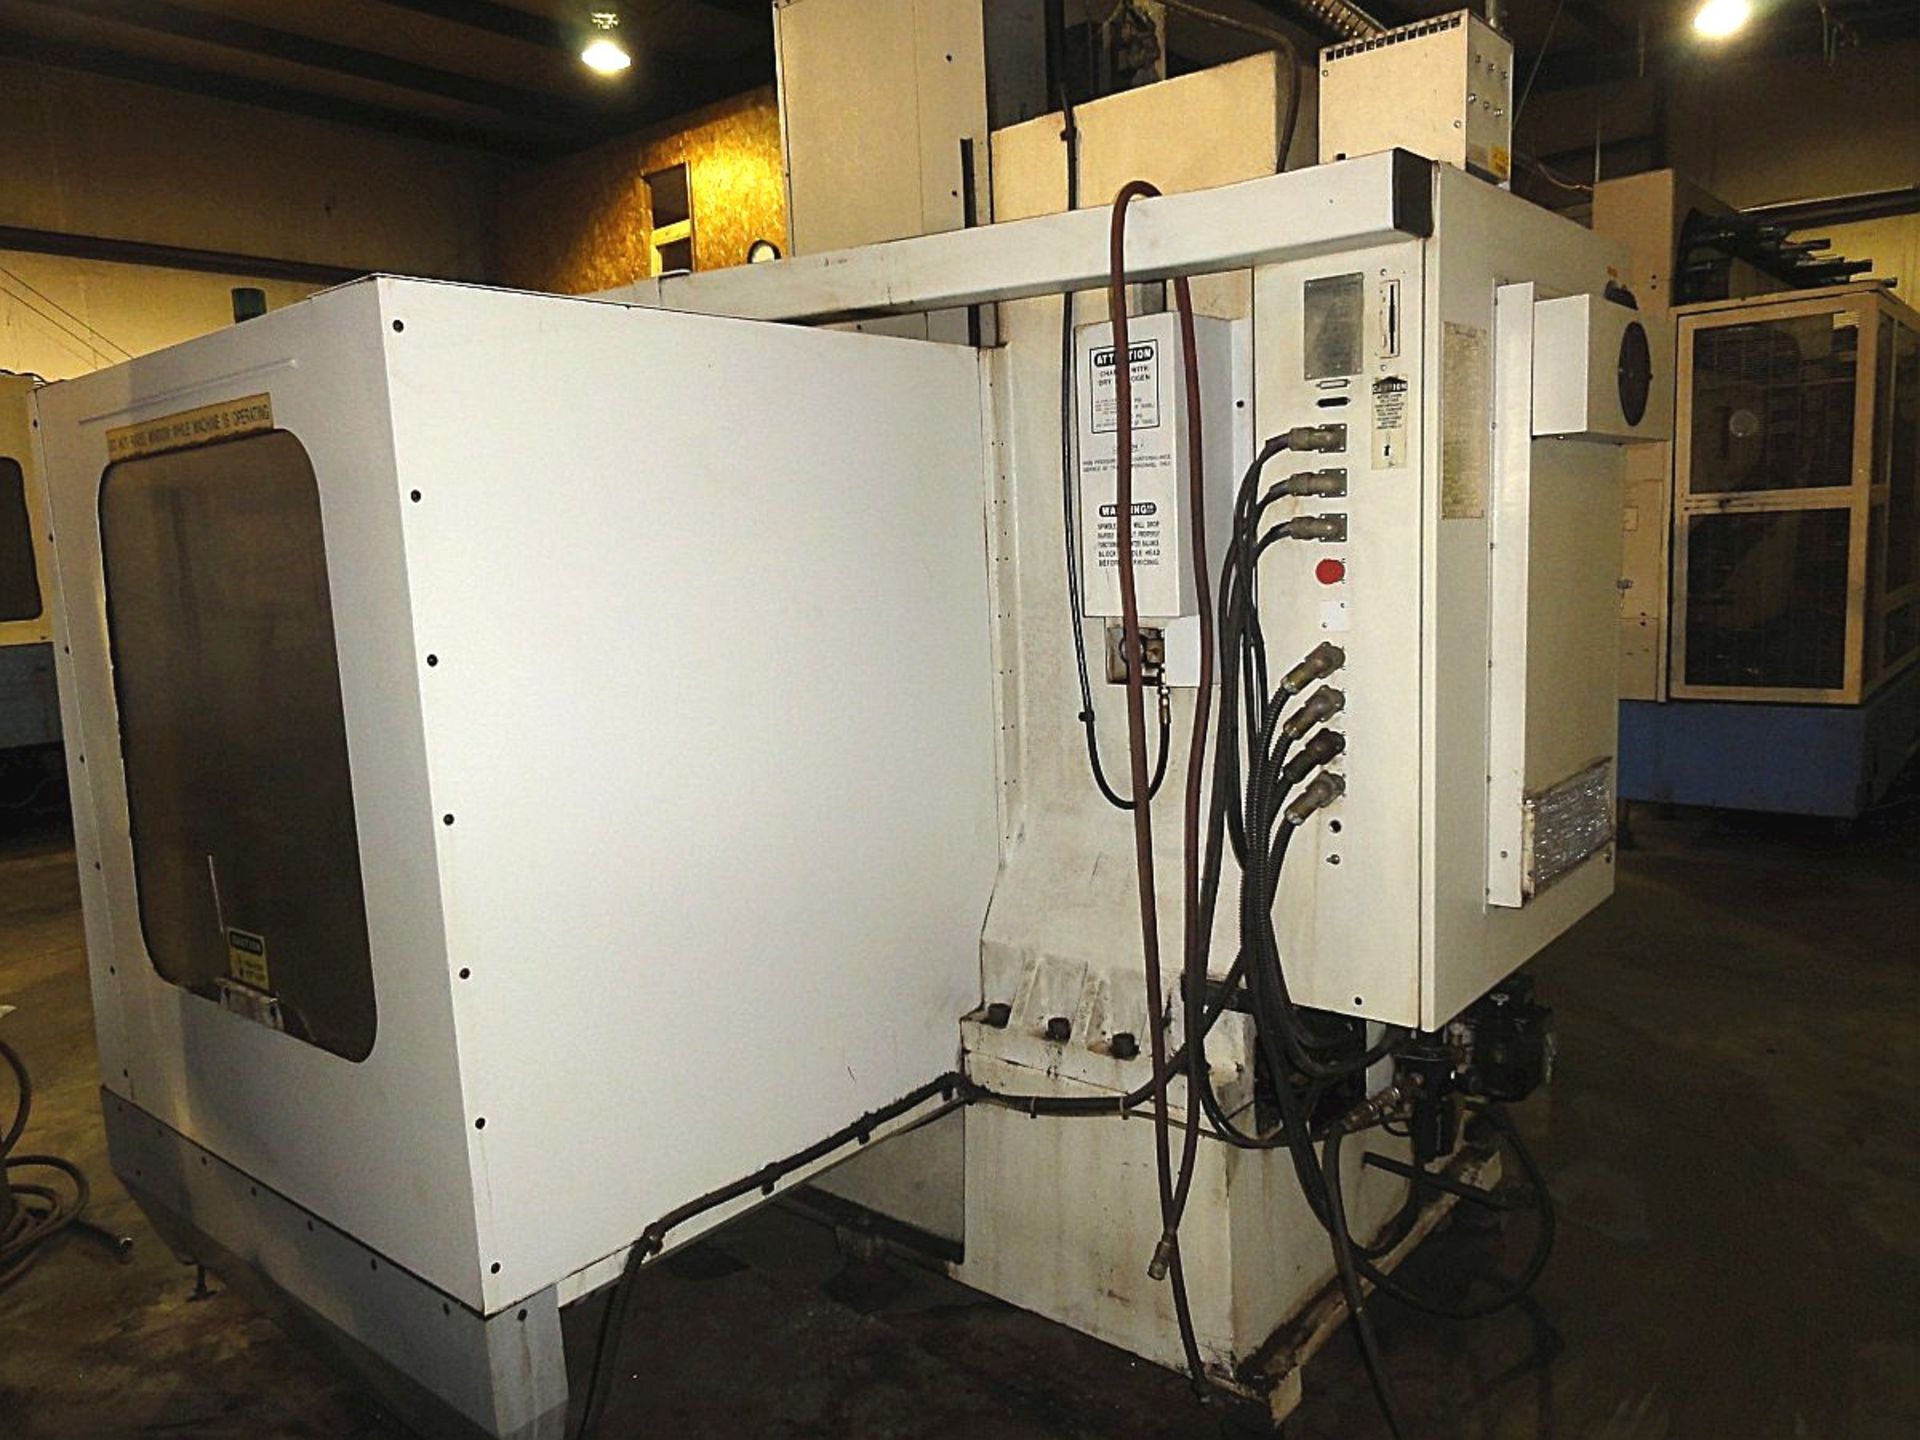 Haas VF3 Vertical CNC Mill, X= 40", Y= 20", Z= 25", 15 HP High Torque, 7,500 RPM, Cat 40 Taper - Image 7 of 12